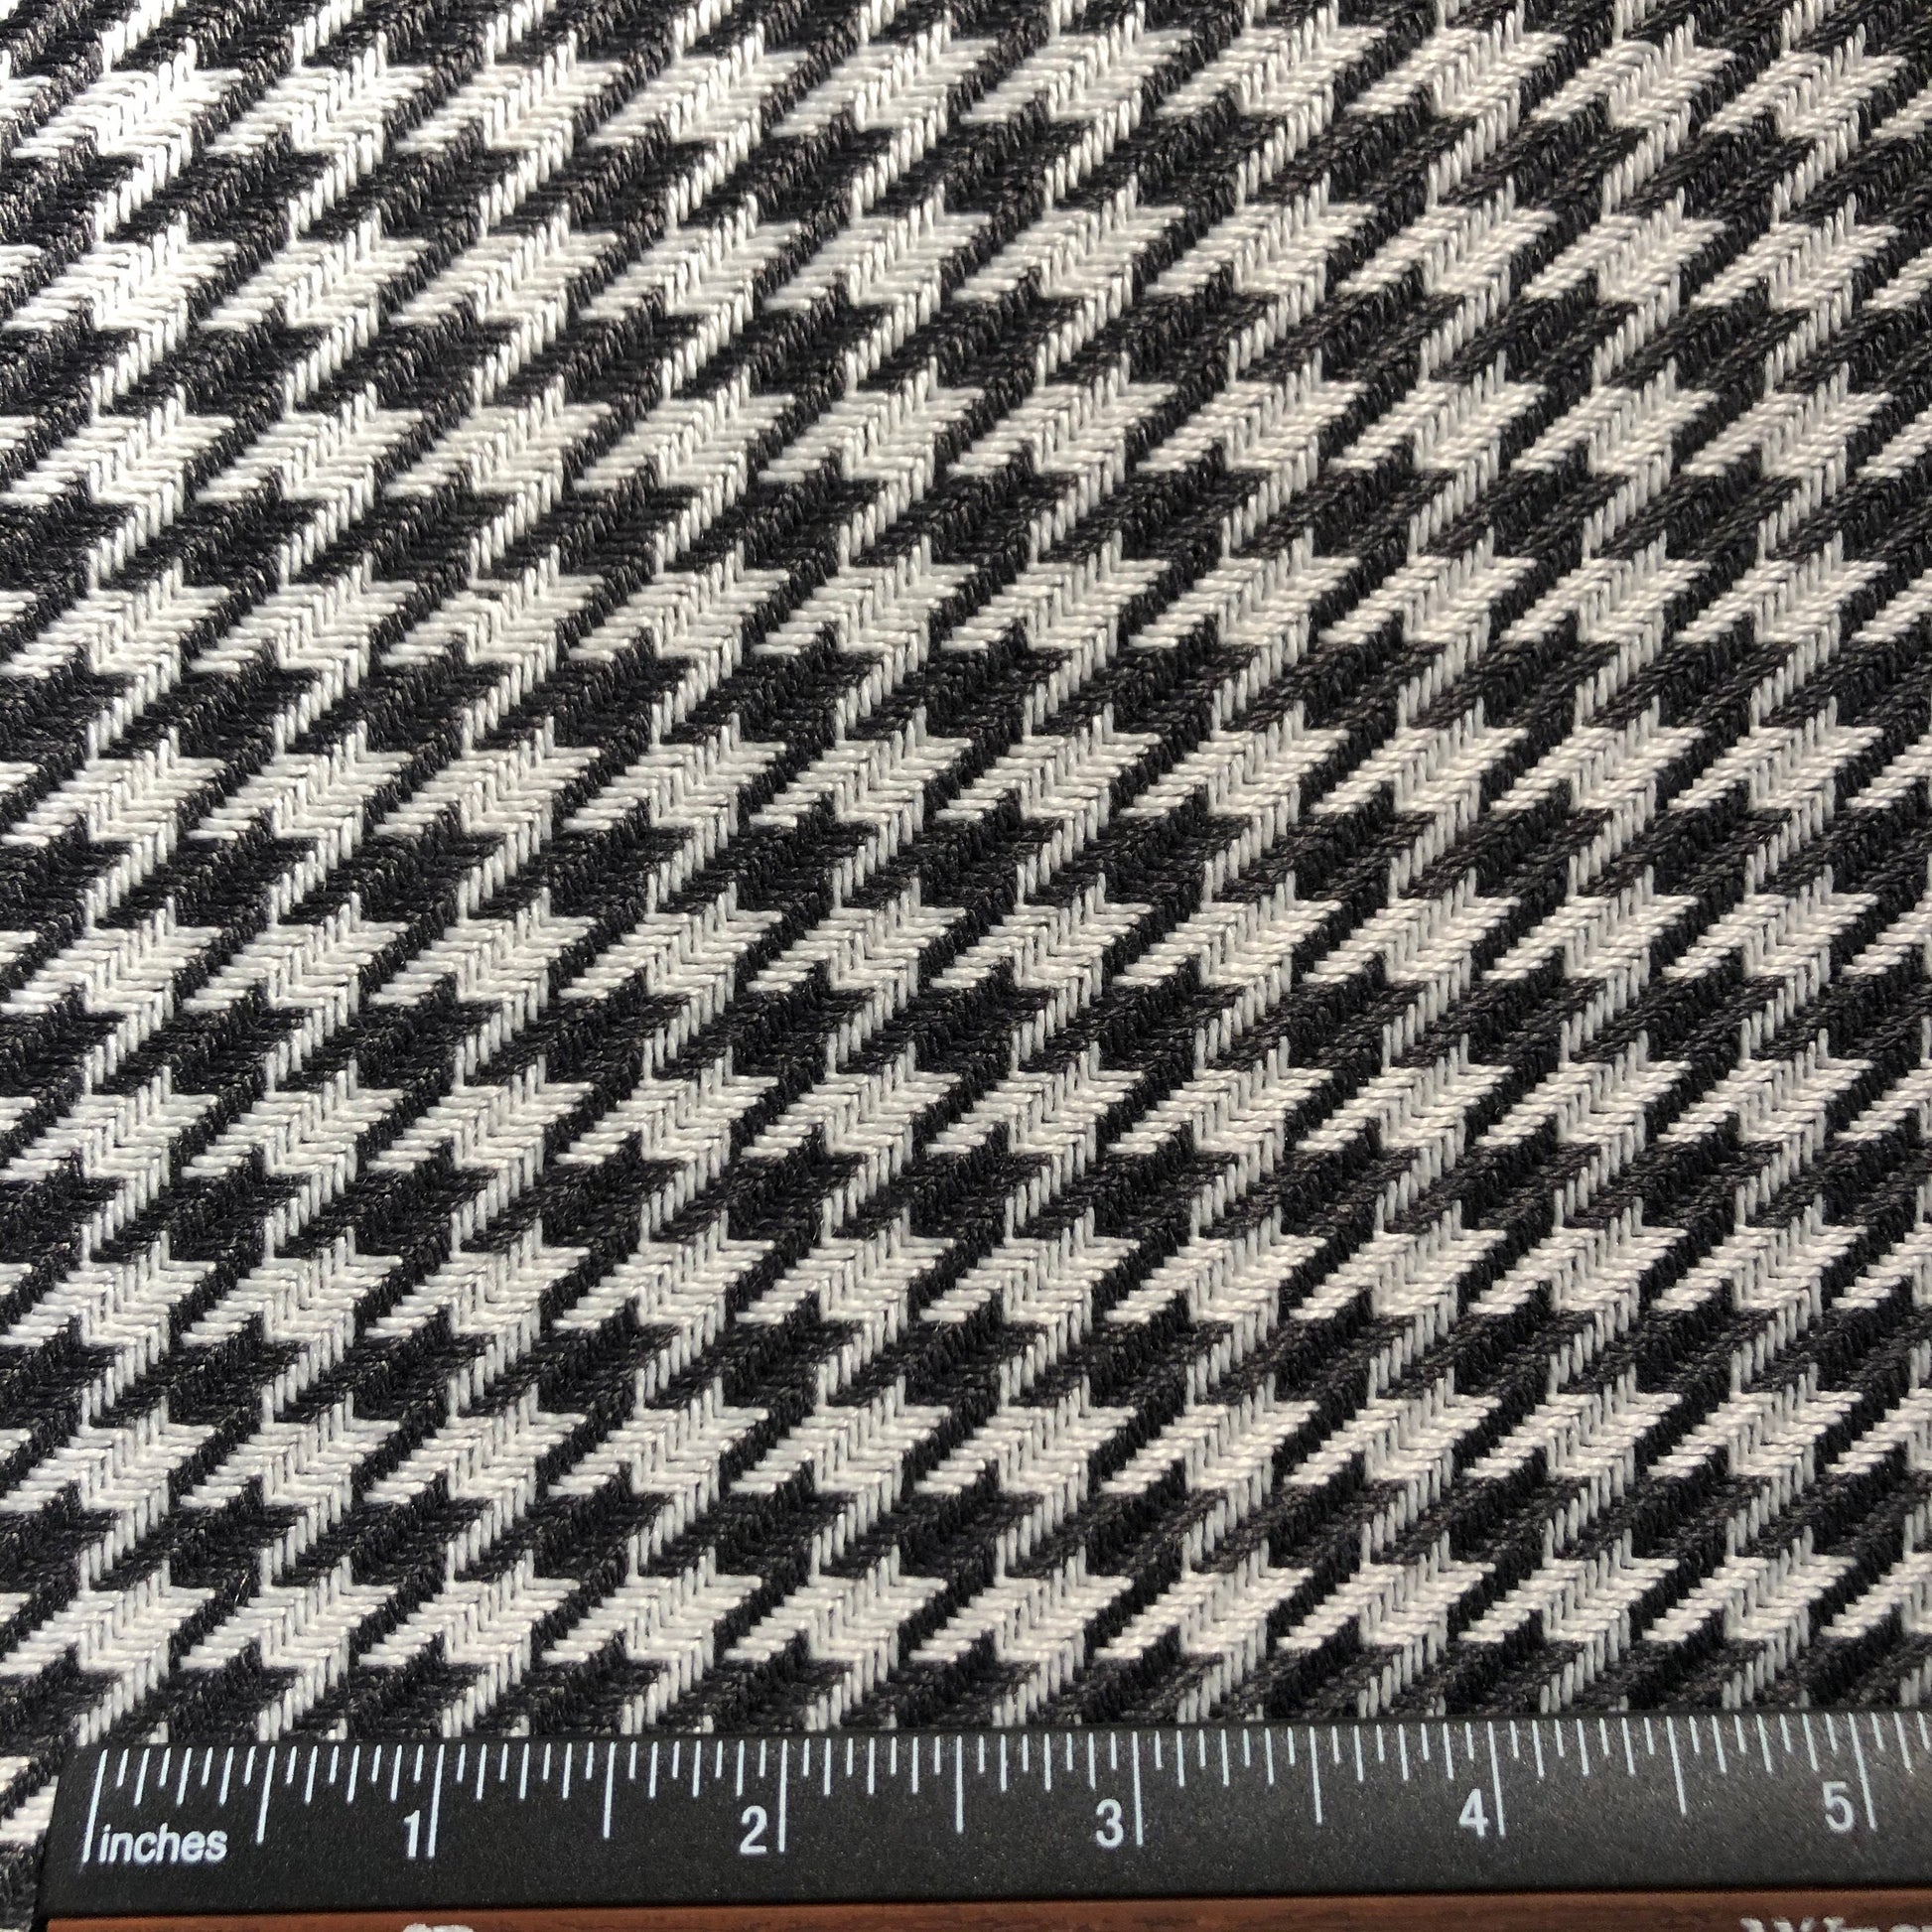 Woven Houndstooth Heavy Duty Upholstery Fabric In Black and white 55" Width-Fabric By The Yard